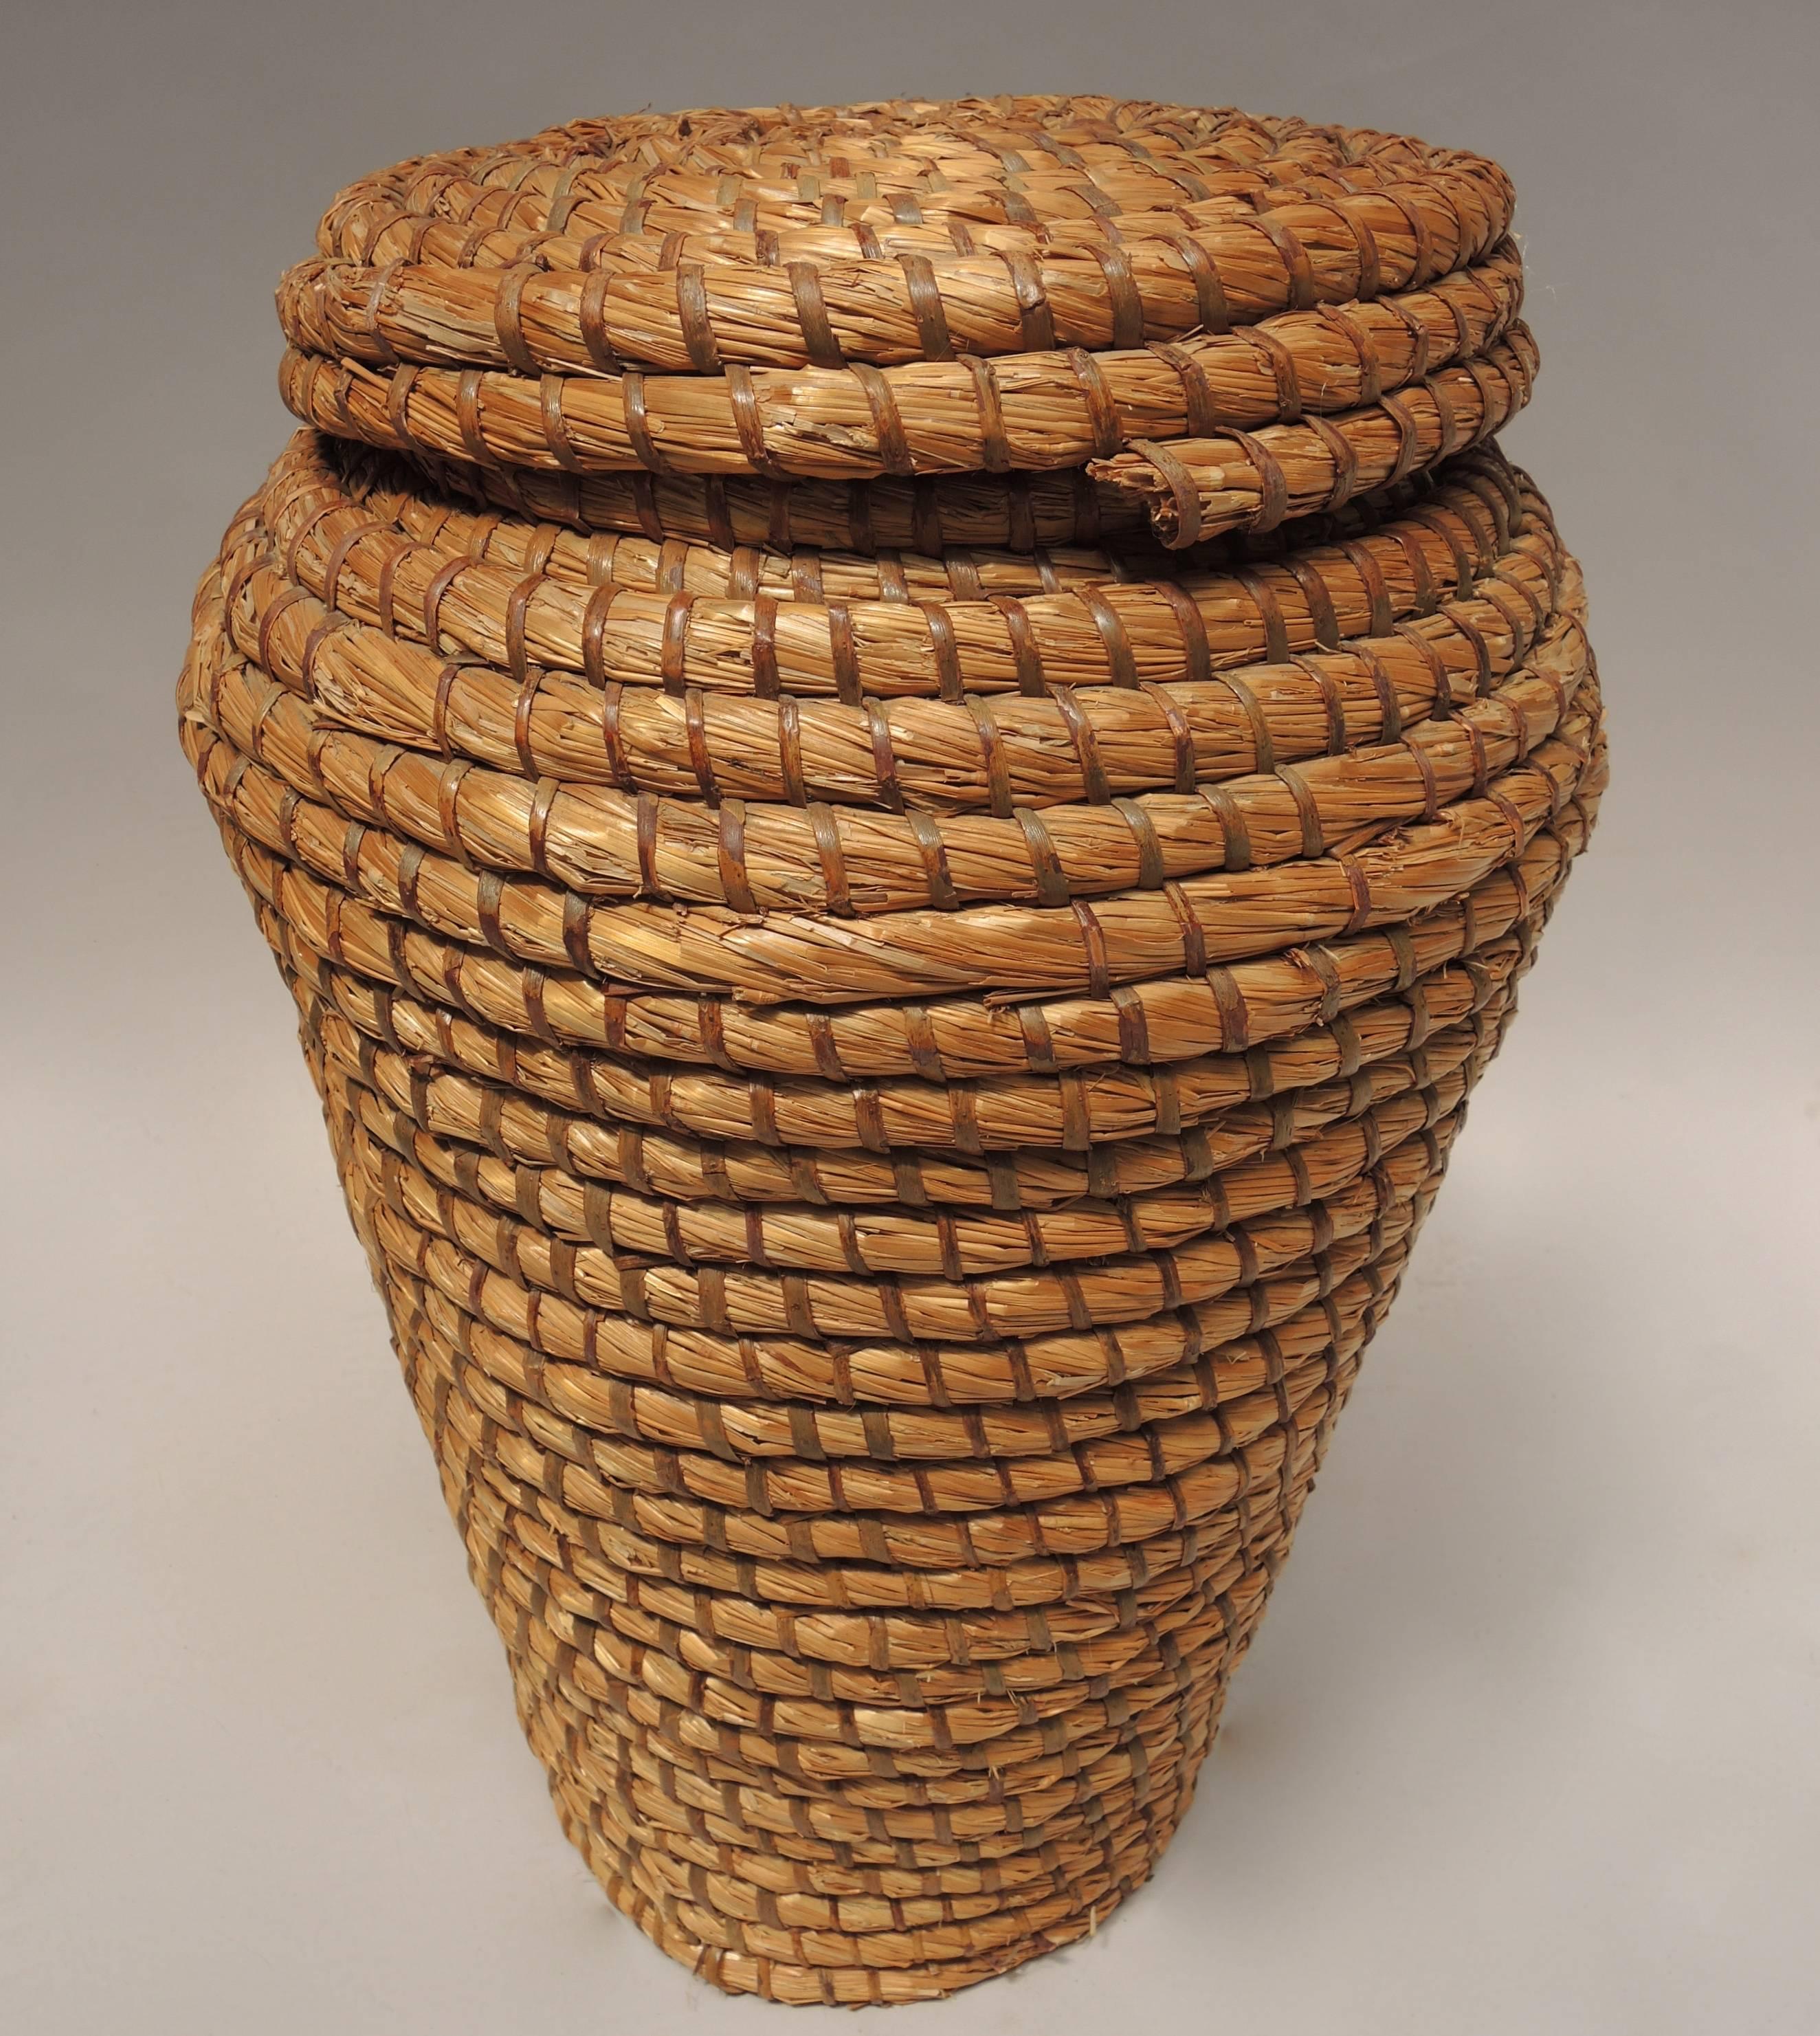 This lidded Belgian farm basket is hand constructed using straw and split oak.
The tightly coiled construction was used to make a durable basket that could be used for multiple tasks on the farm.